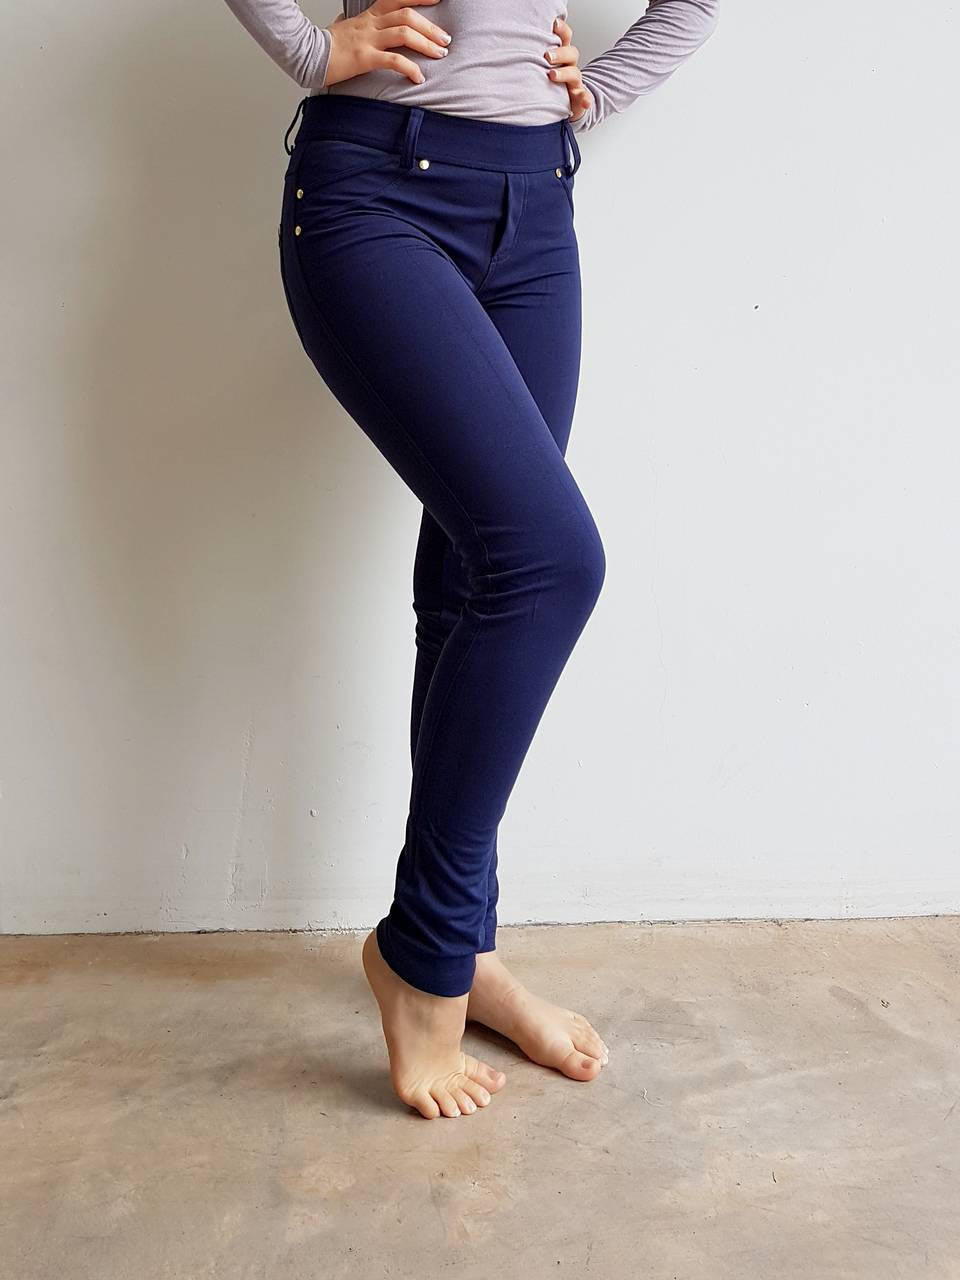 3 Simple Ways to Stretch Cotton Pants Legs - wikiHow